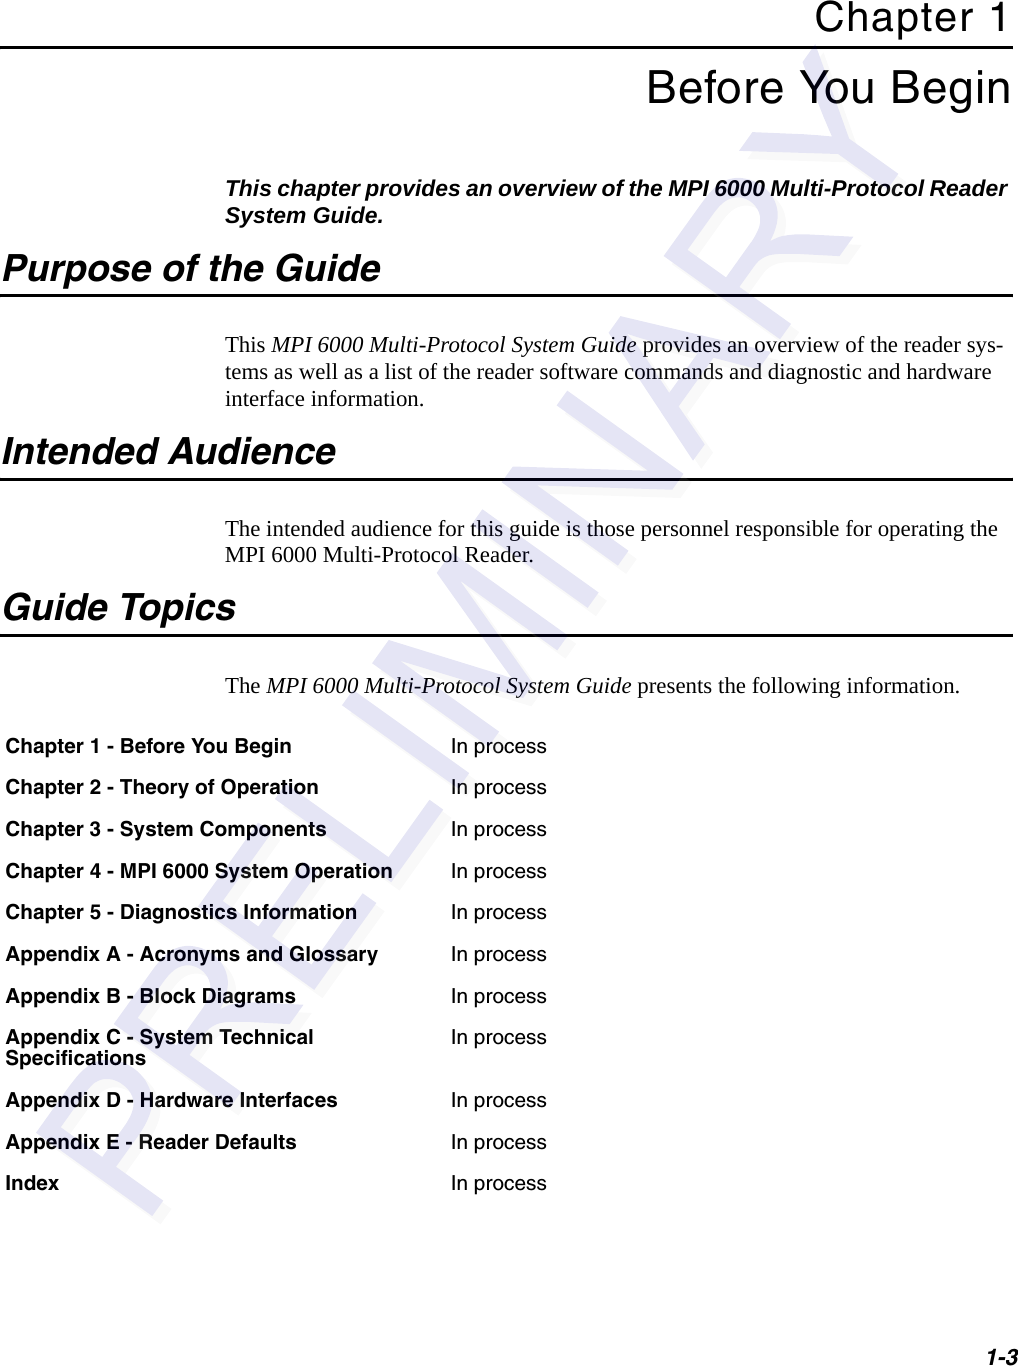 1-3Chapter 1Before You BeginThis chapter provides an overview of the MPI 6000 Multi-Protocol Reader System Guide.Purpose of the GuideThis MPI 6000 Multi-Protocol System Guide provides an overview of the reader sys-tems as well as a list of the reader software commands and diagnostic and hardware interface information.Intended AudienceThe intended audience for this guide is those personnel responsible for operating the MPI 6000 Multi-Protocol Reader.Guide TopicsThe MPI 6000 Multi-Protocol System Guide presents the following information.Chapter 1 - Before You Begin In processChapter 2 - Theory of Operation In processChapter 3 - System Components In processChapter 4 - MPI 6000 System Operation In processChapter 5 - Diagnostics Information In processAppendix A - Acronyms and Glossary In processAppendix B - Block Diagrams In processAppendix C - System Technical SpecificationsIn processAppendix D - Hardware Interfaces In processAppendix E - Reader Defaults In processIndex In process